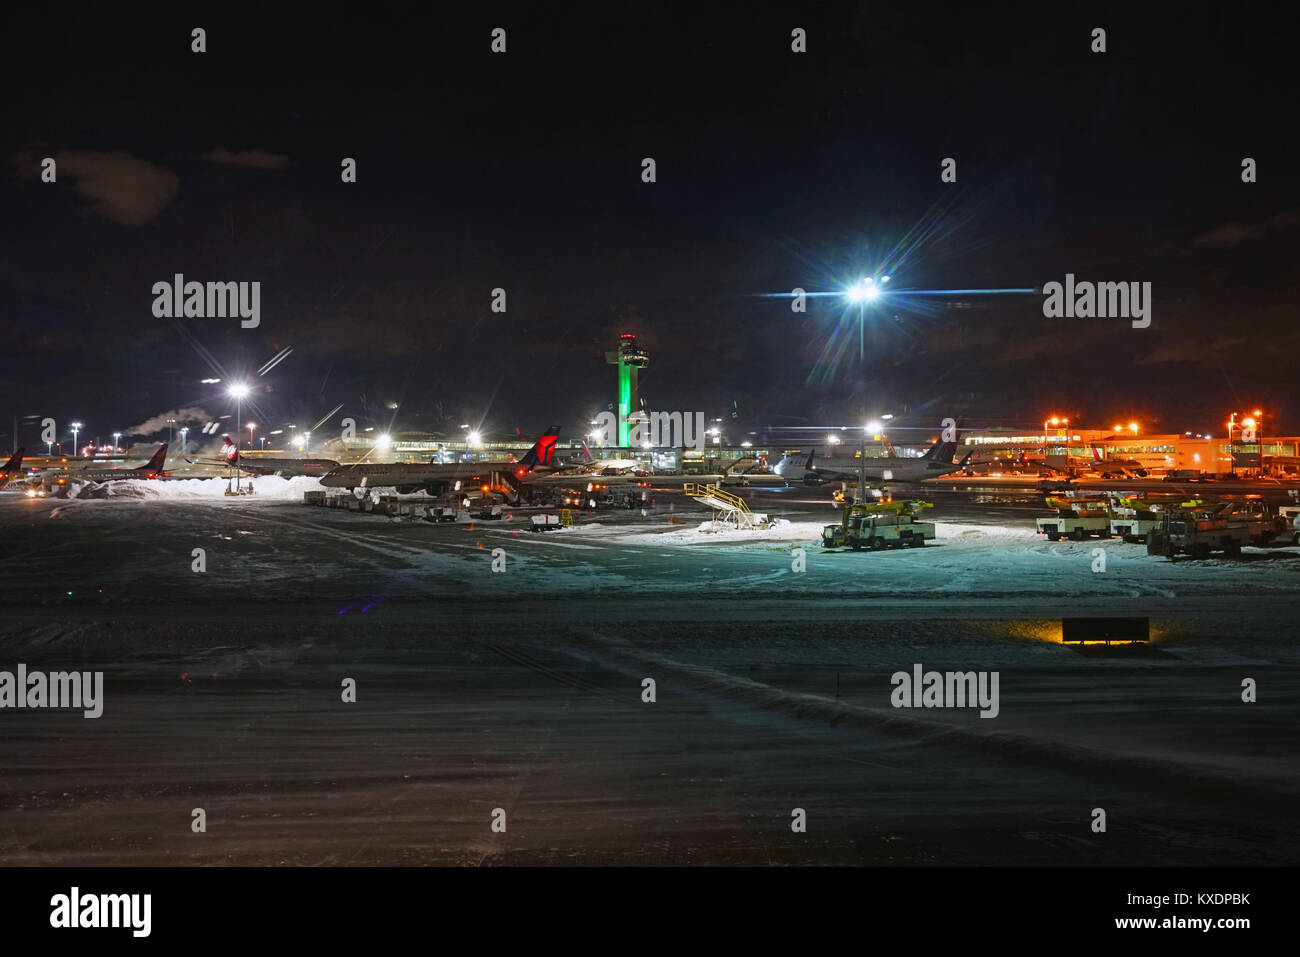 Night view of the operations mess and delays at the John F. Kennedy International Airport (JFK) after the bomb cyclone winter snow storm Grayson. Stock Photo